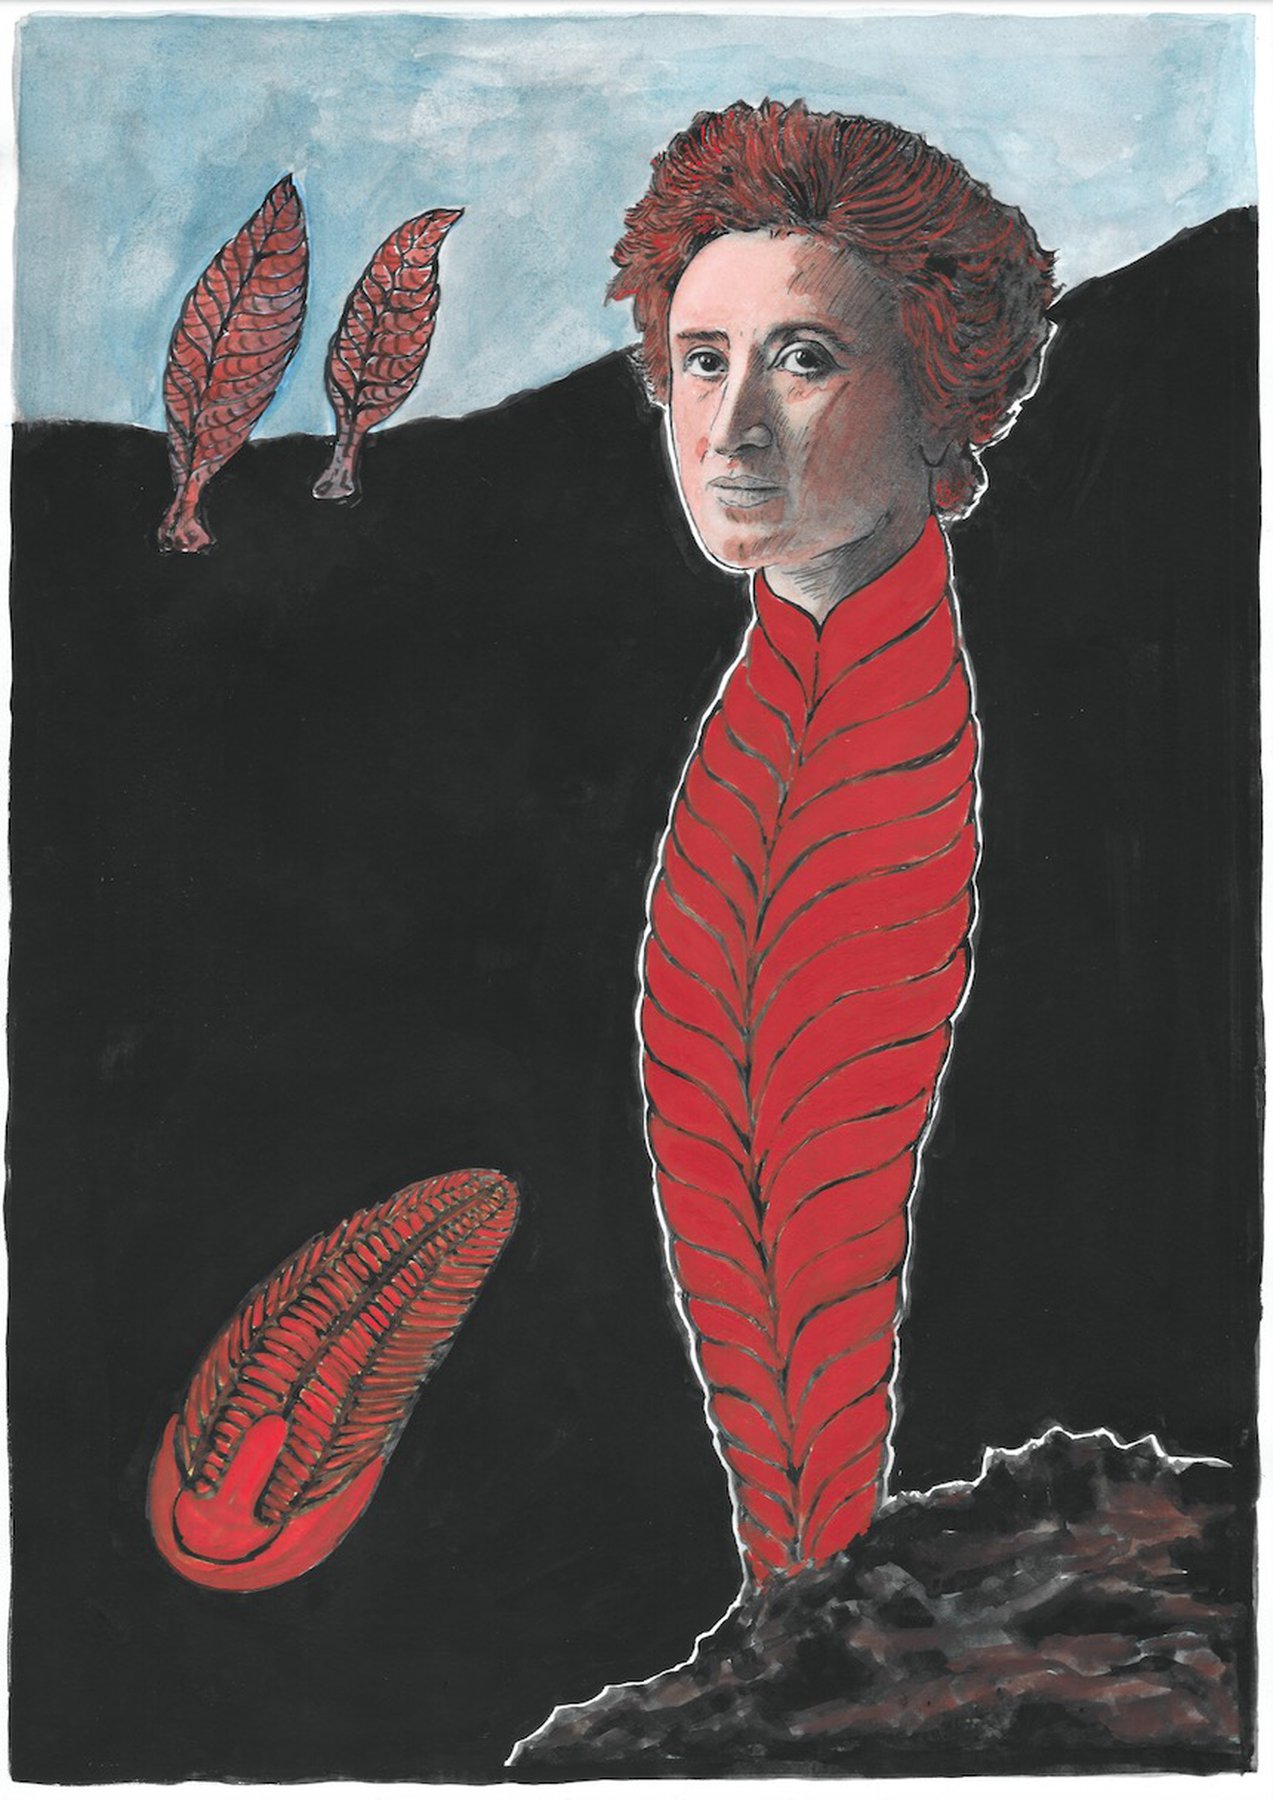 94 Million Years of Collectivism, Rosa Luxemburg (1871-1919) with Charnia and Spriggina